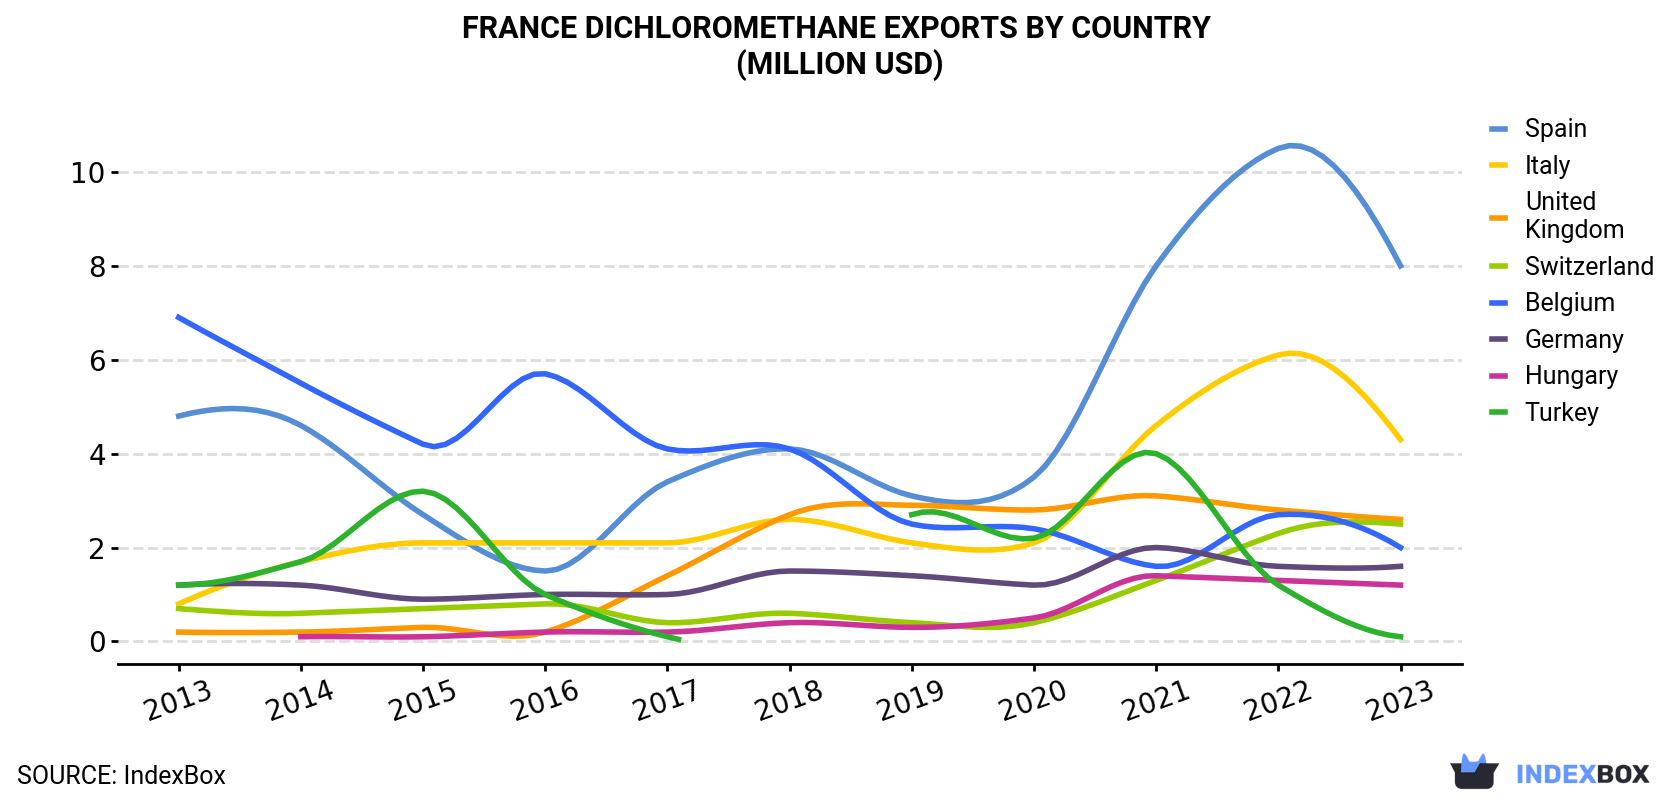 France Dichloromethane Exports By Country (Million USD)